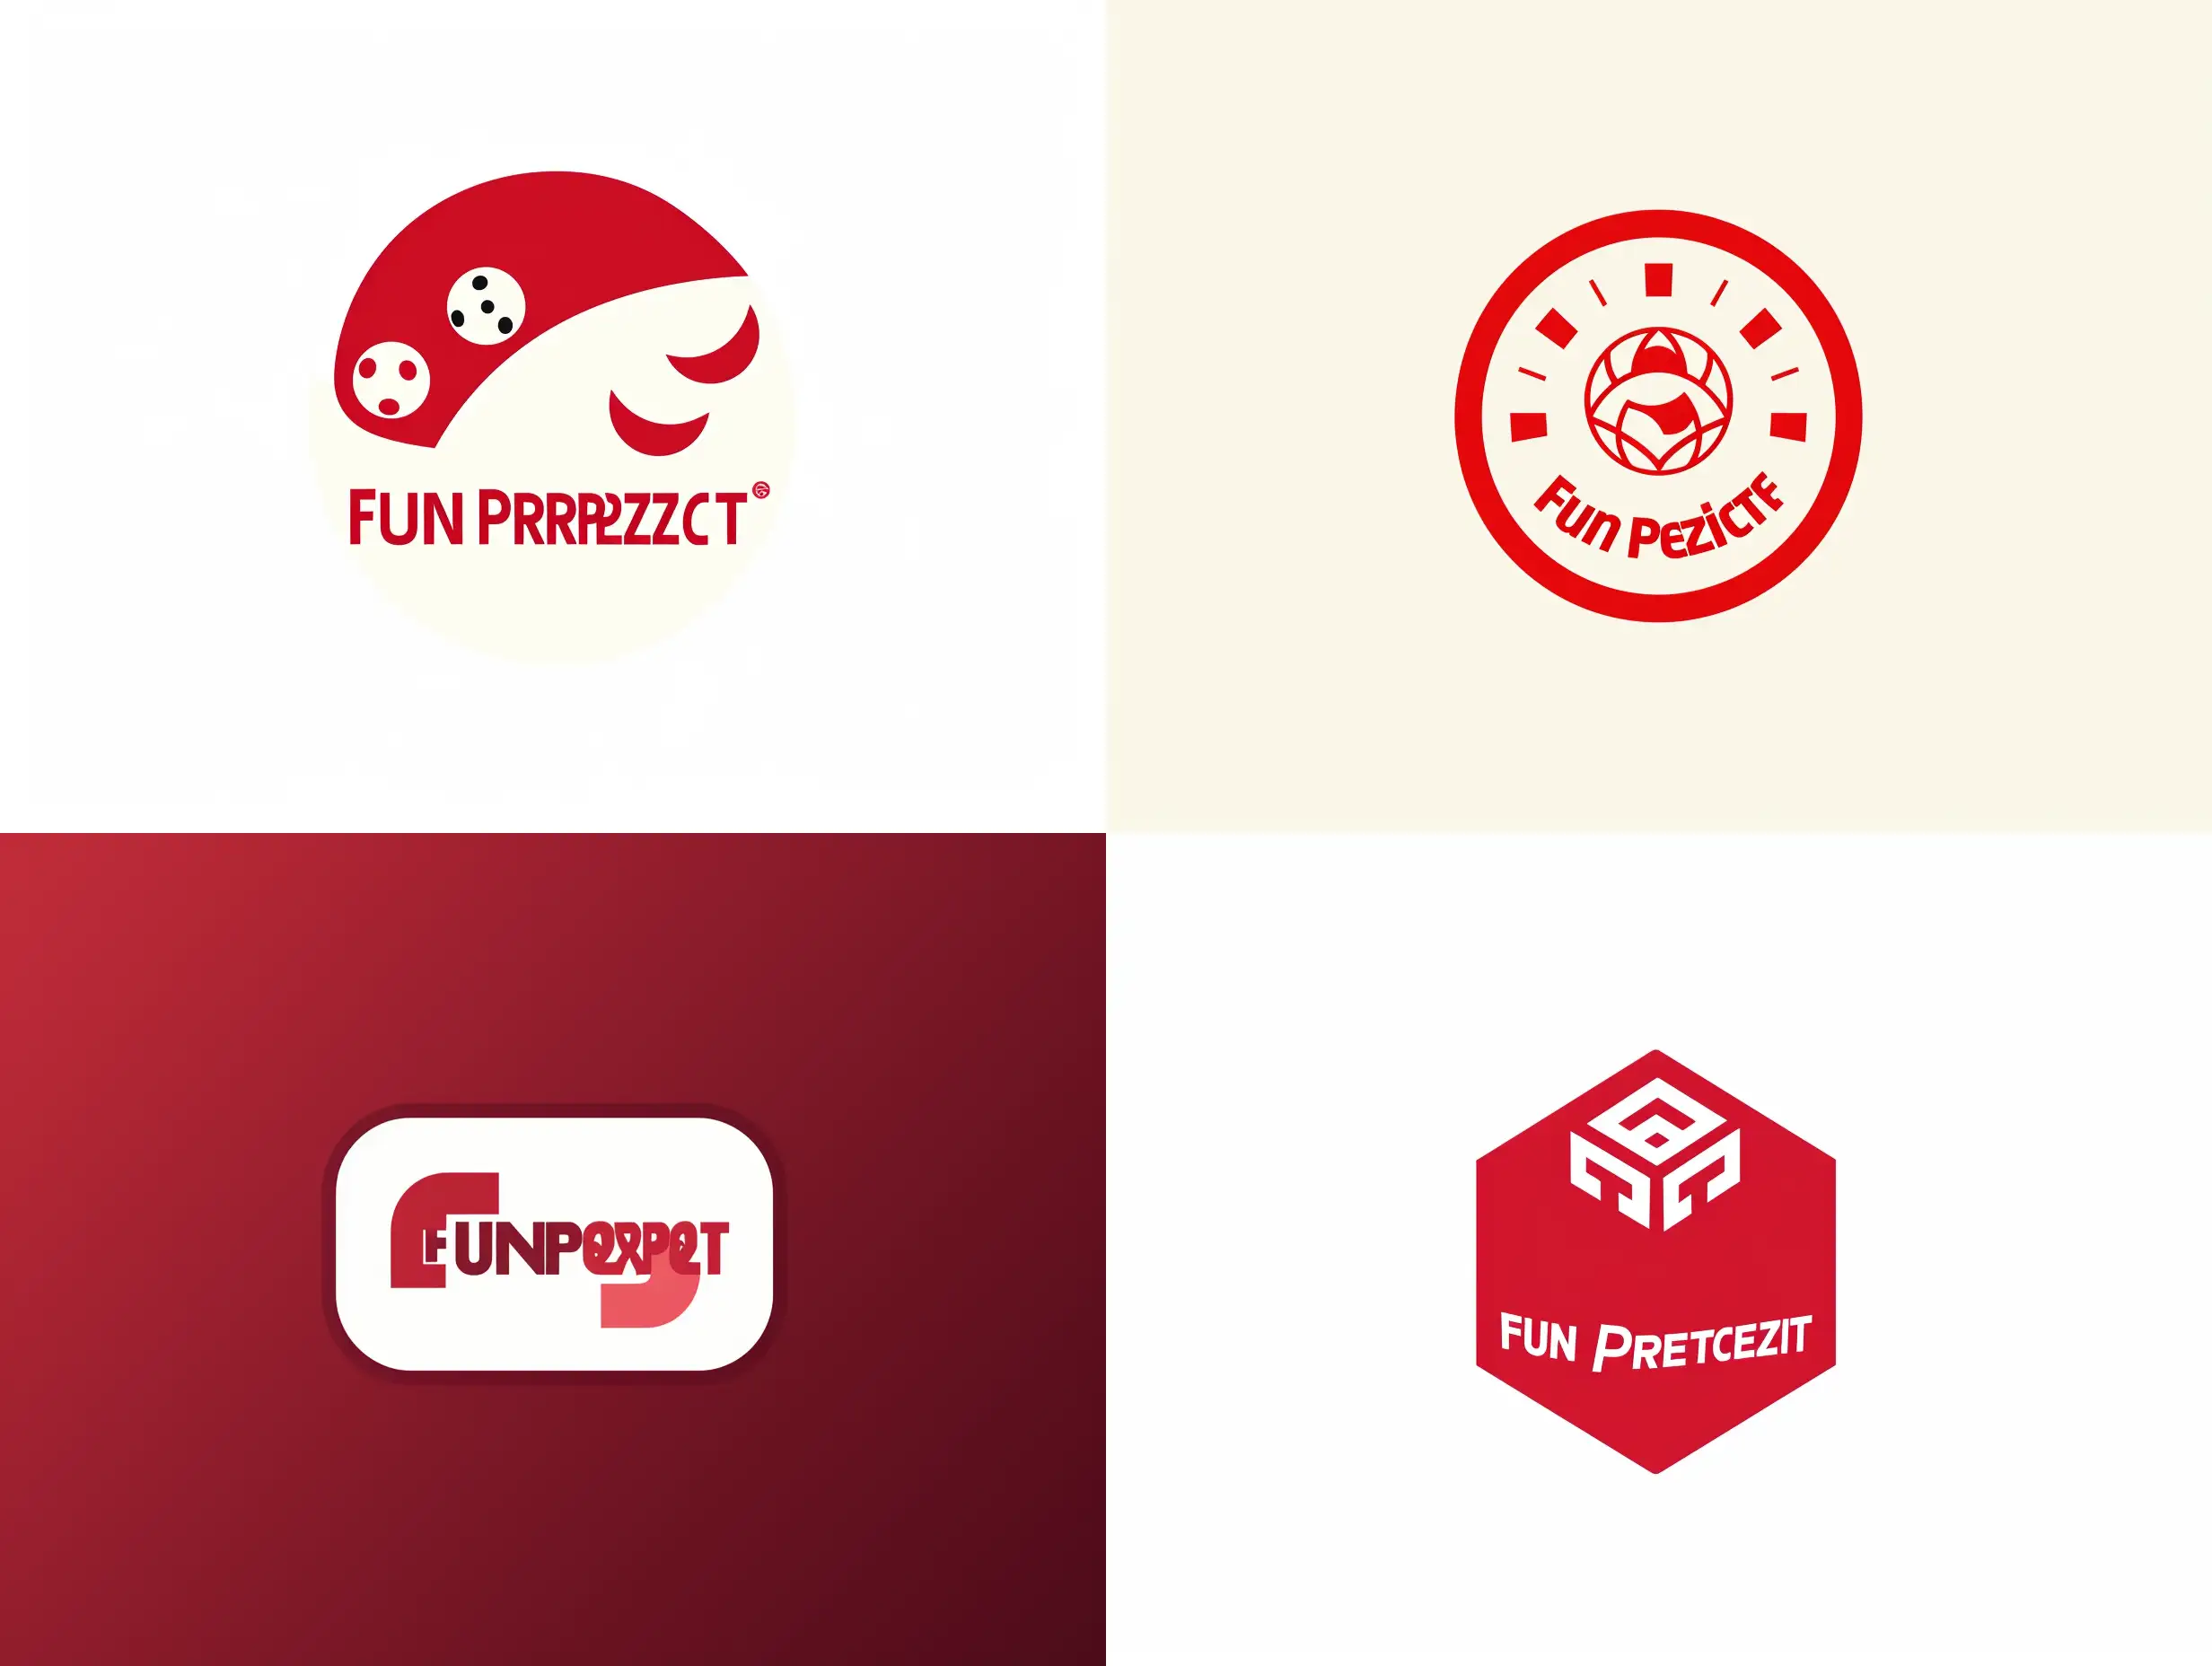 make a logo for the company "FunPredict" in red and white style